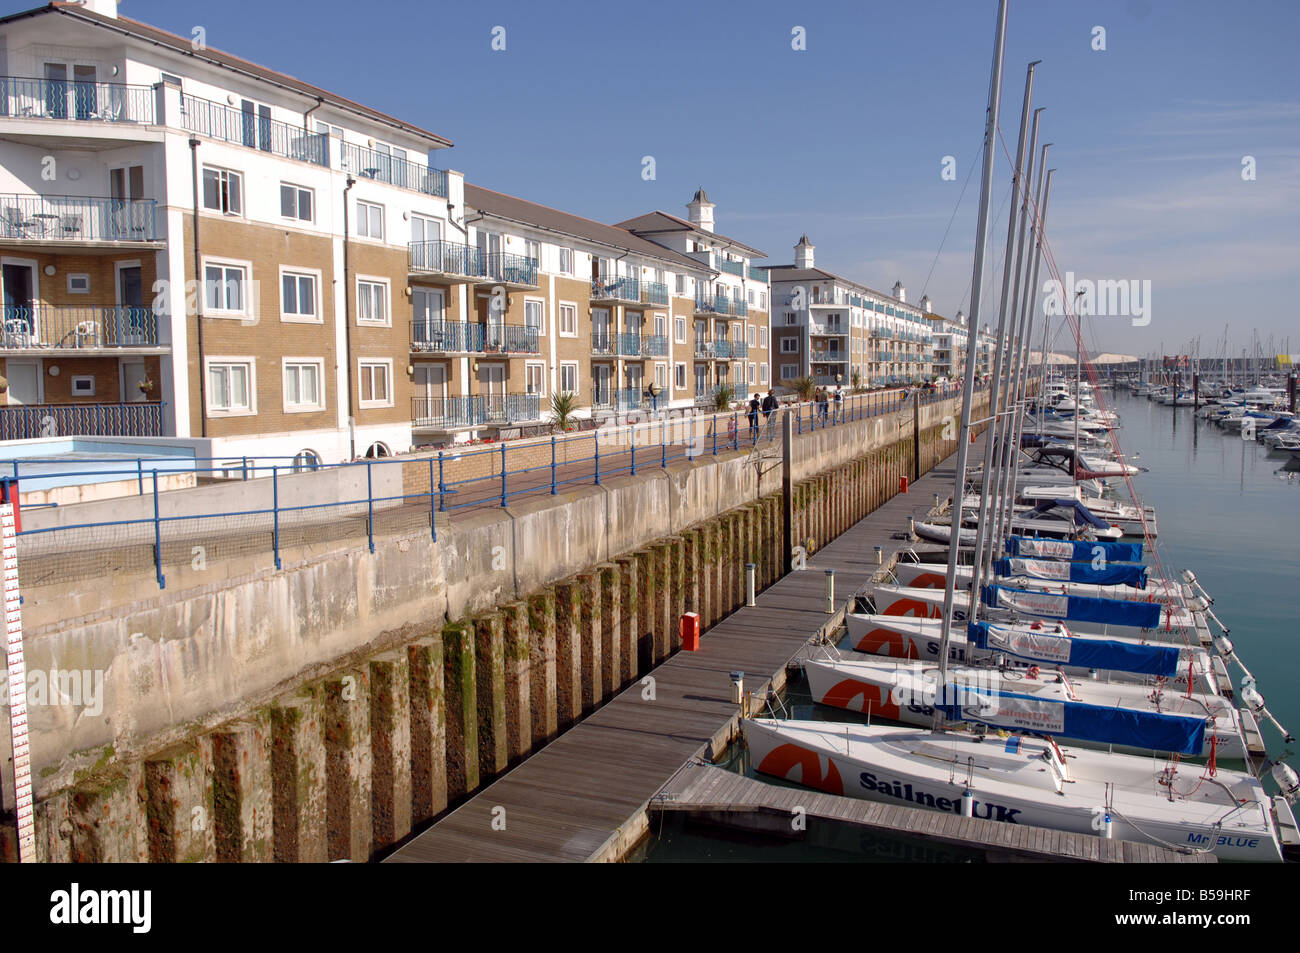 Waterfront flats and appartments overlooking moored yachts in Brighton Marina October 2008 Stock Photo